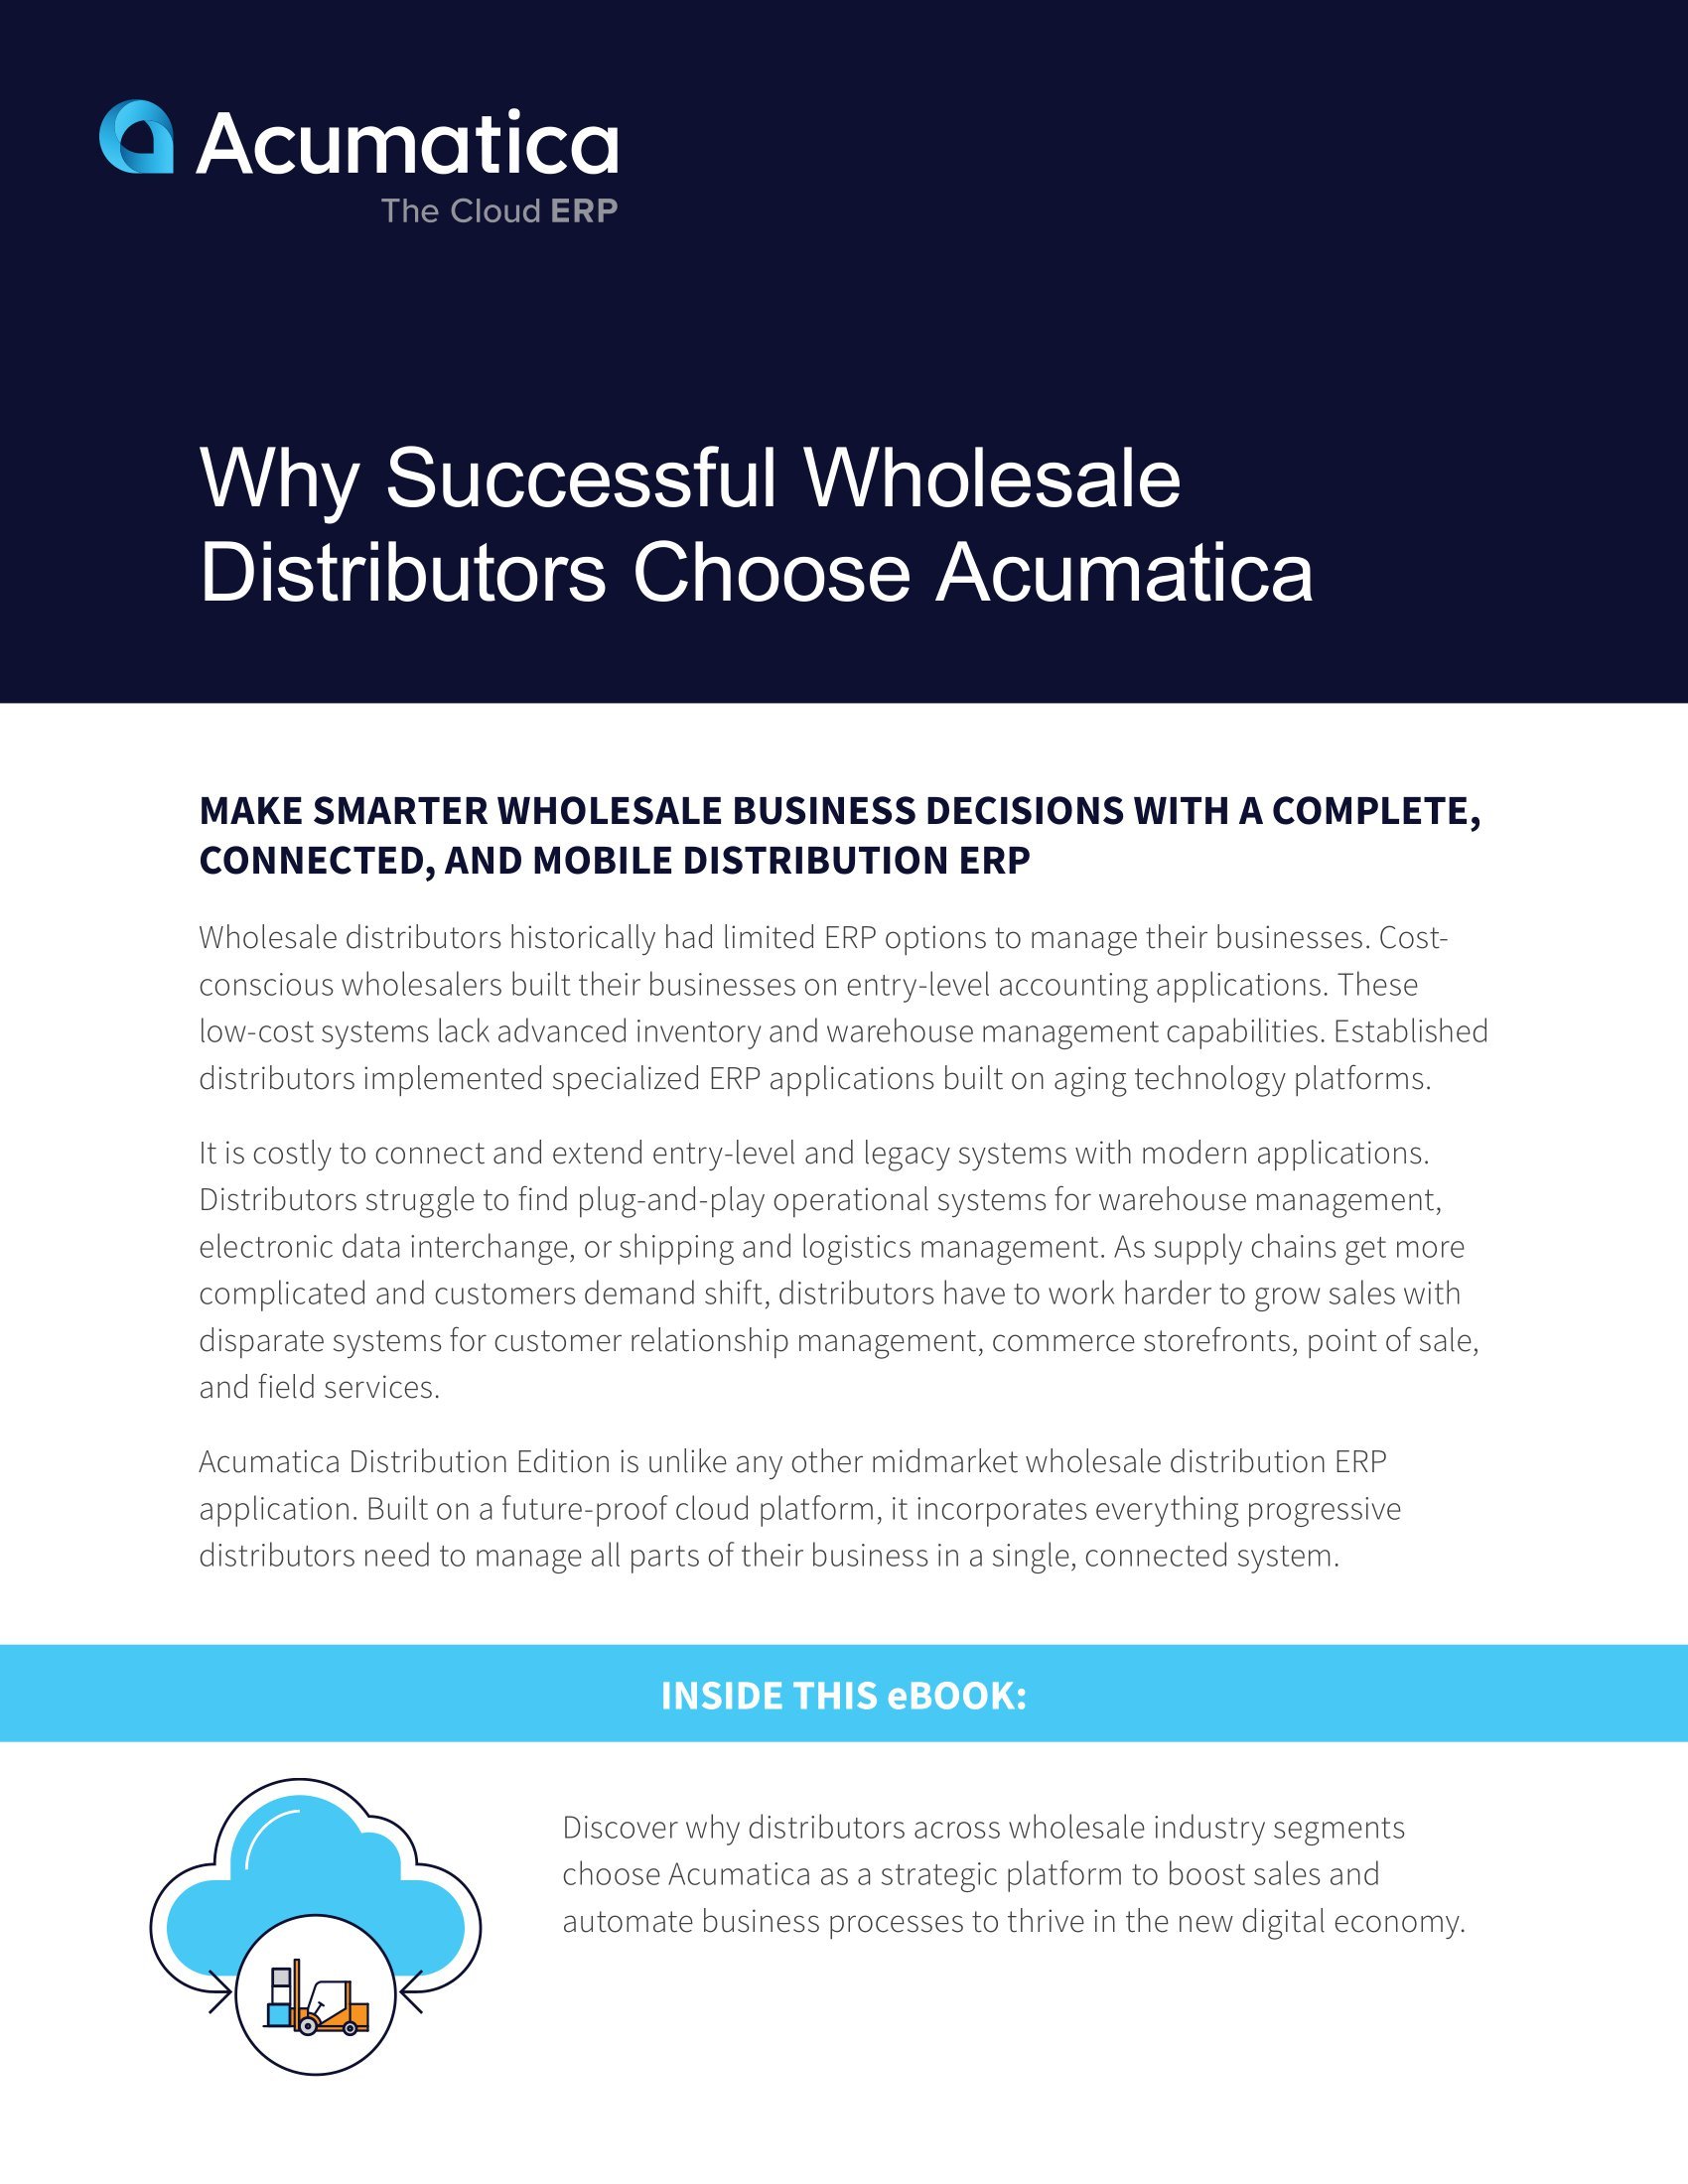 Best ERP for Distributors: Why Successful Companies Choose Acumatica